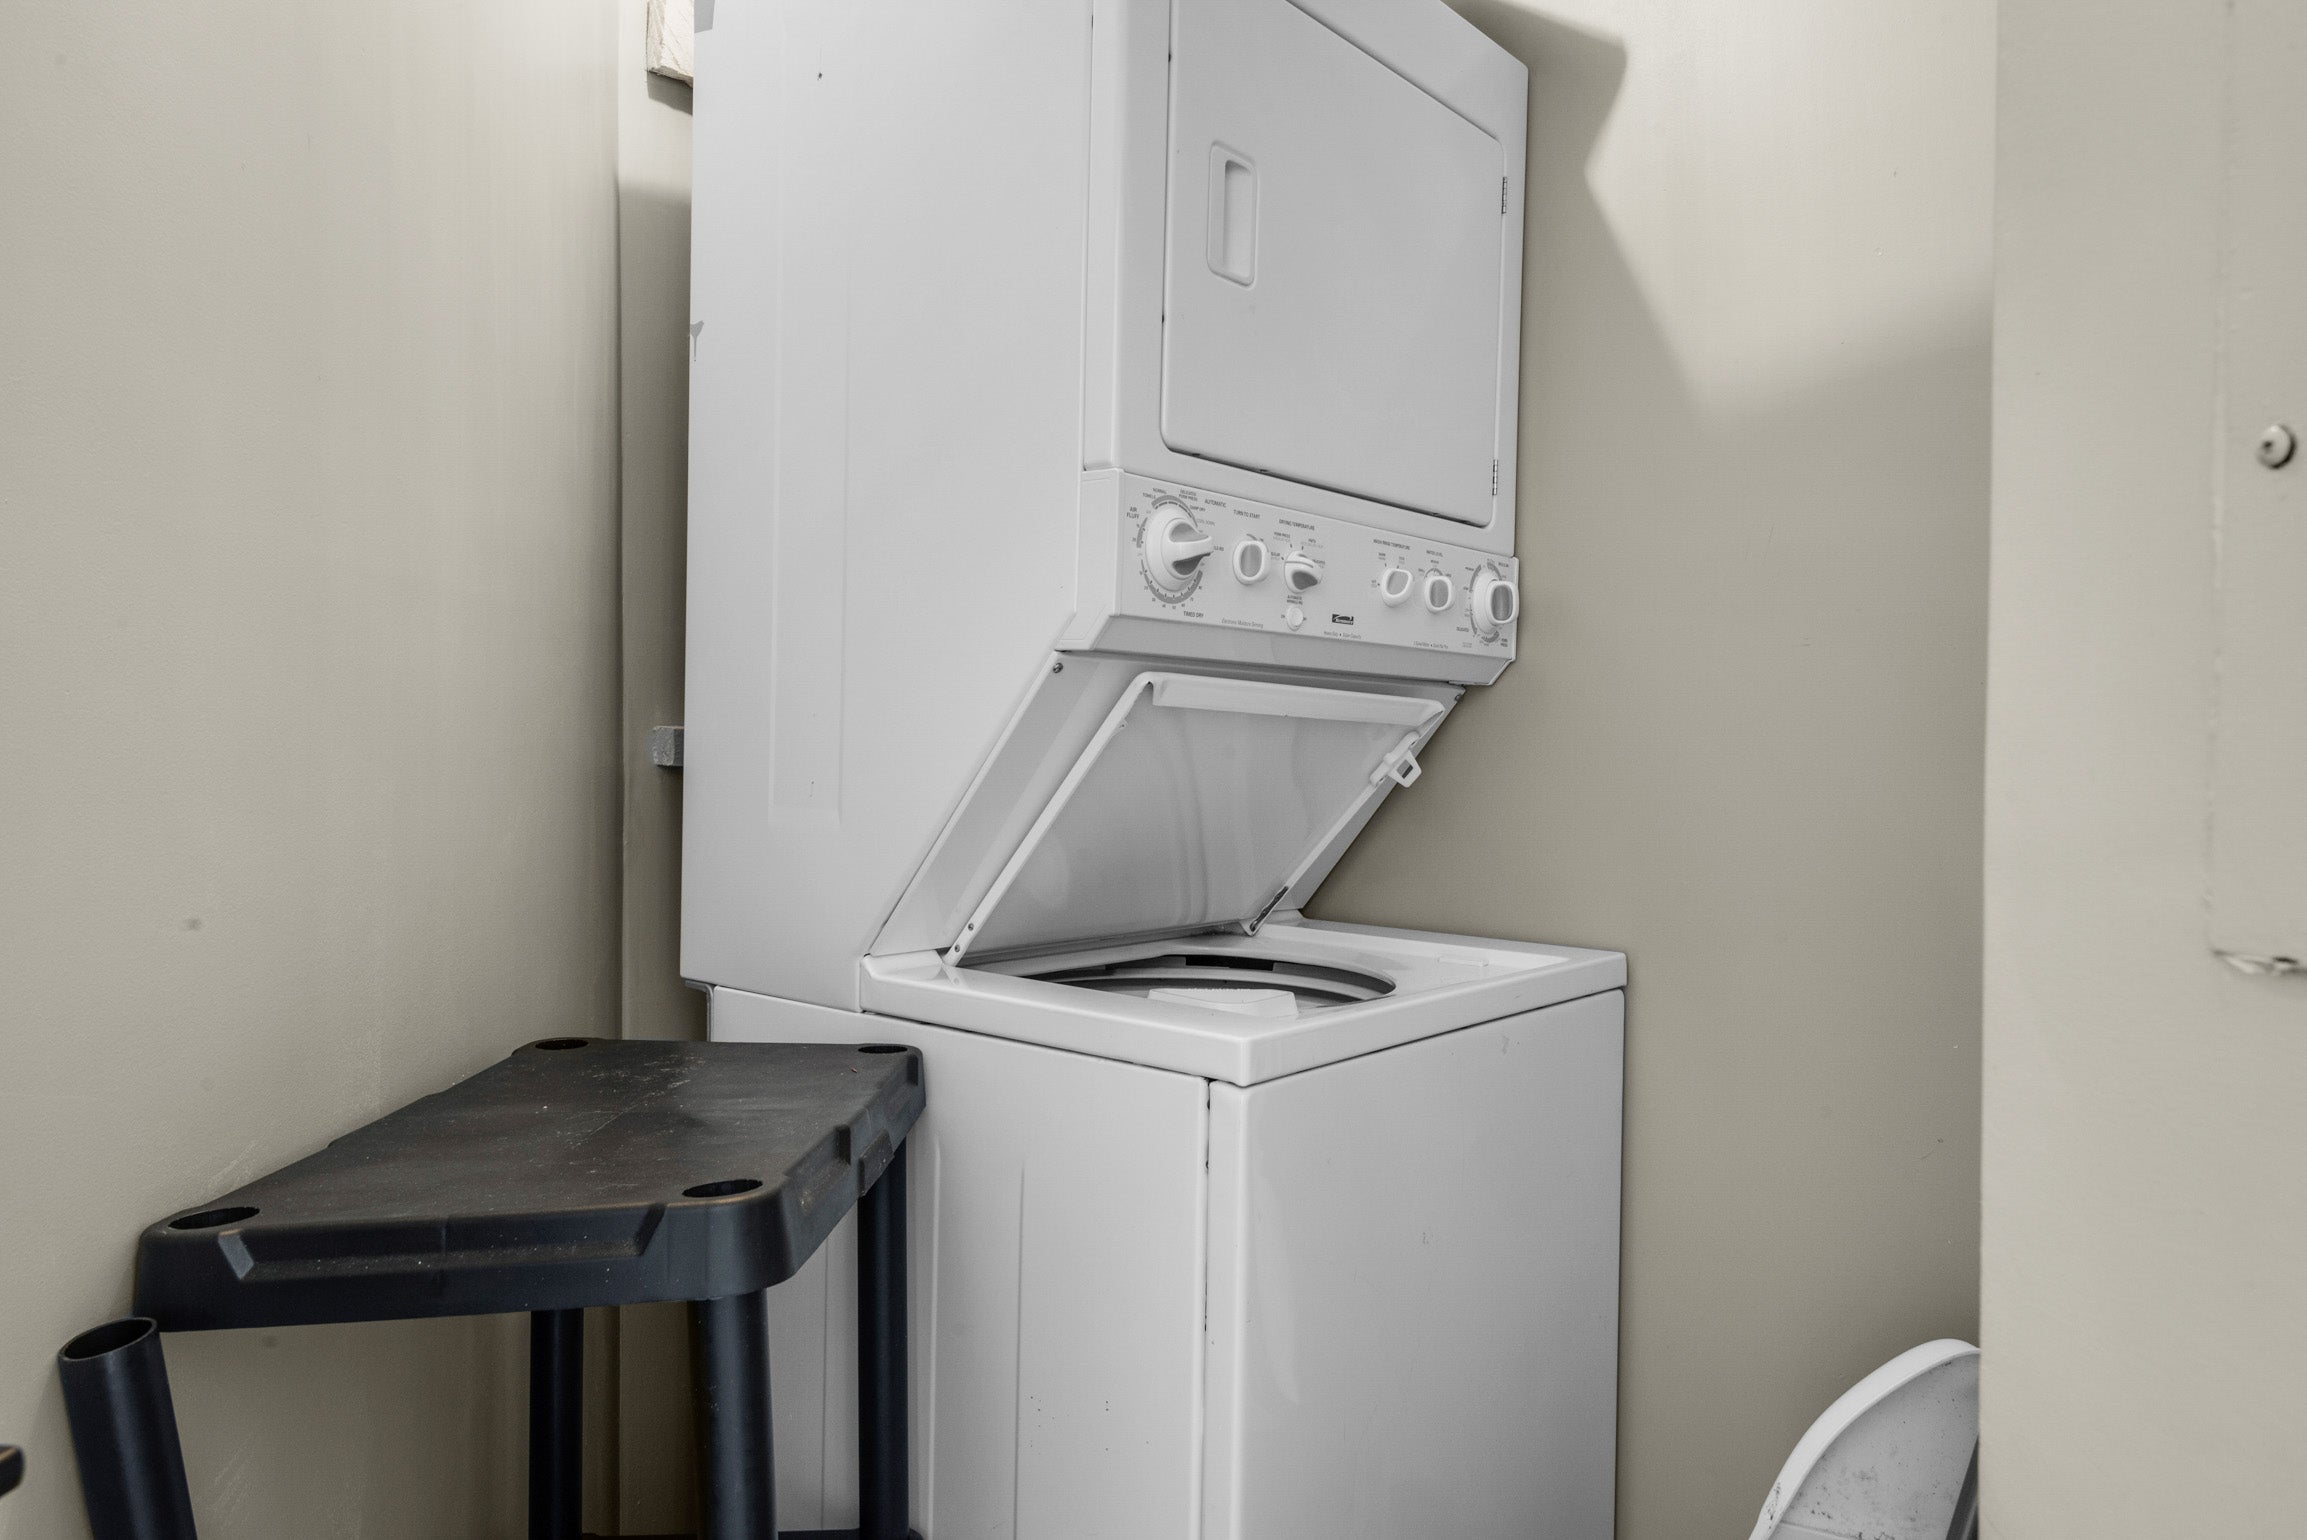 Washer and ddryer